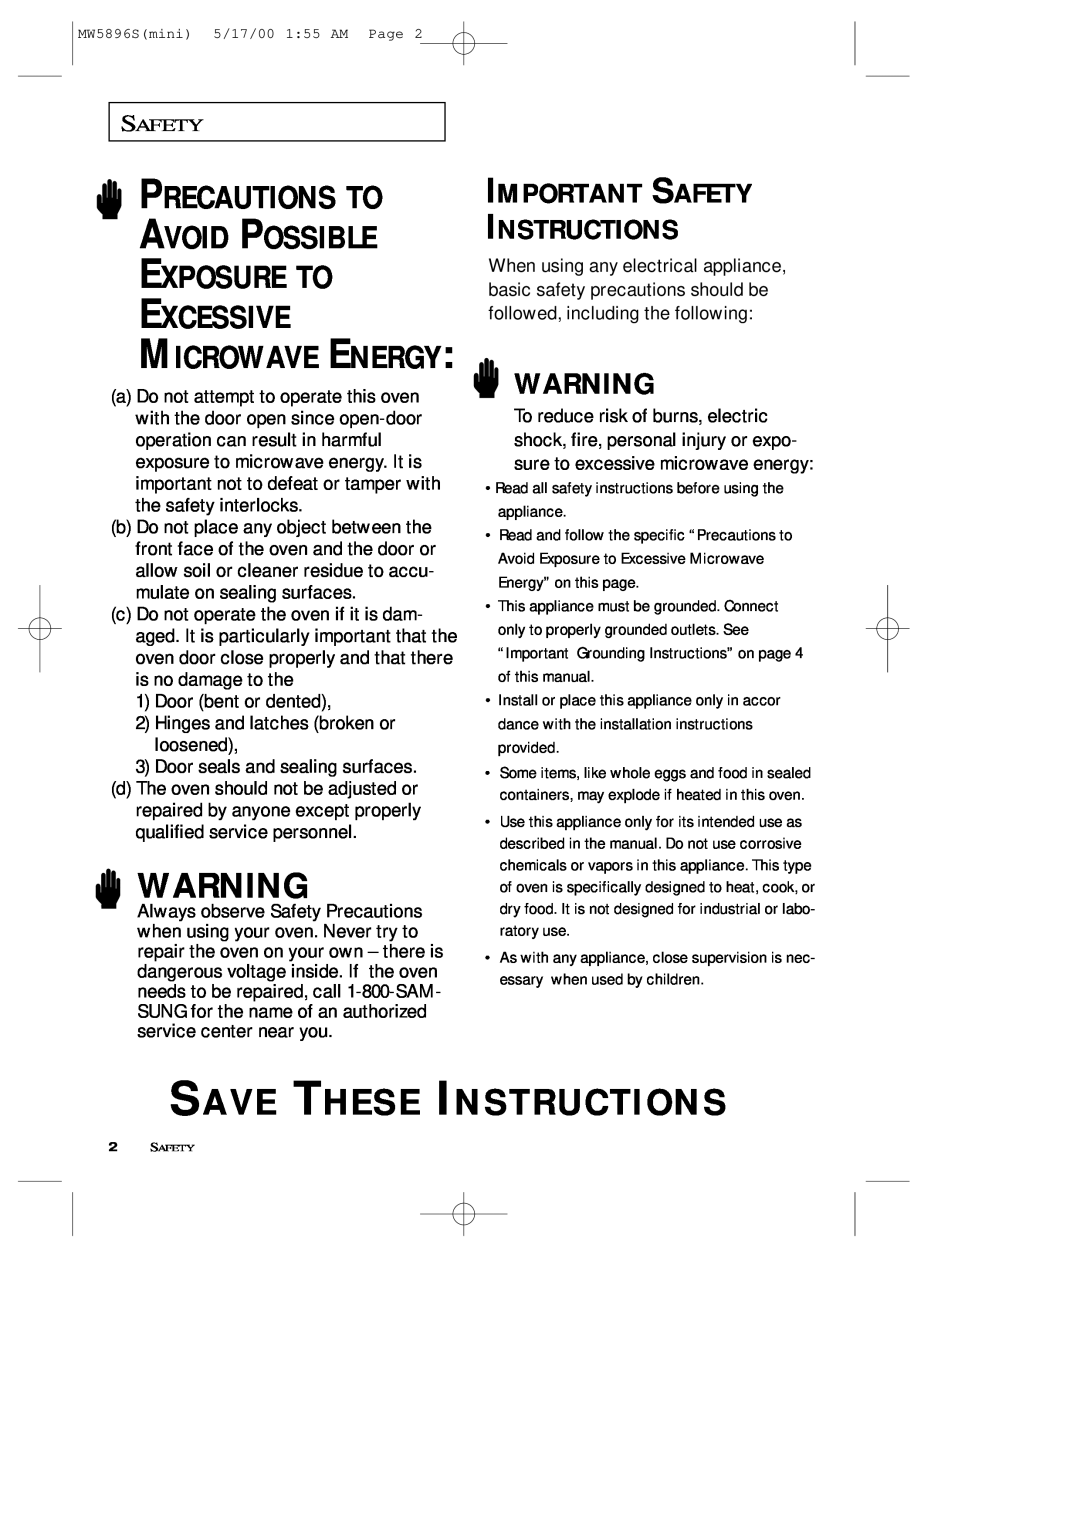 Samsung MW5892S Save These Instructions, Precautions To Avoid Possible Exposure To, Excessive, Microwave Energy 